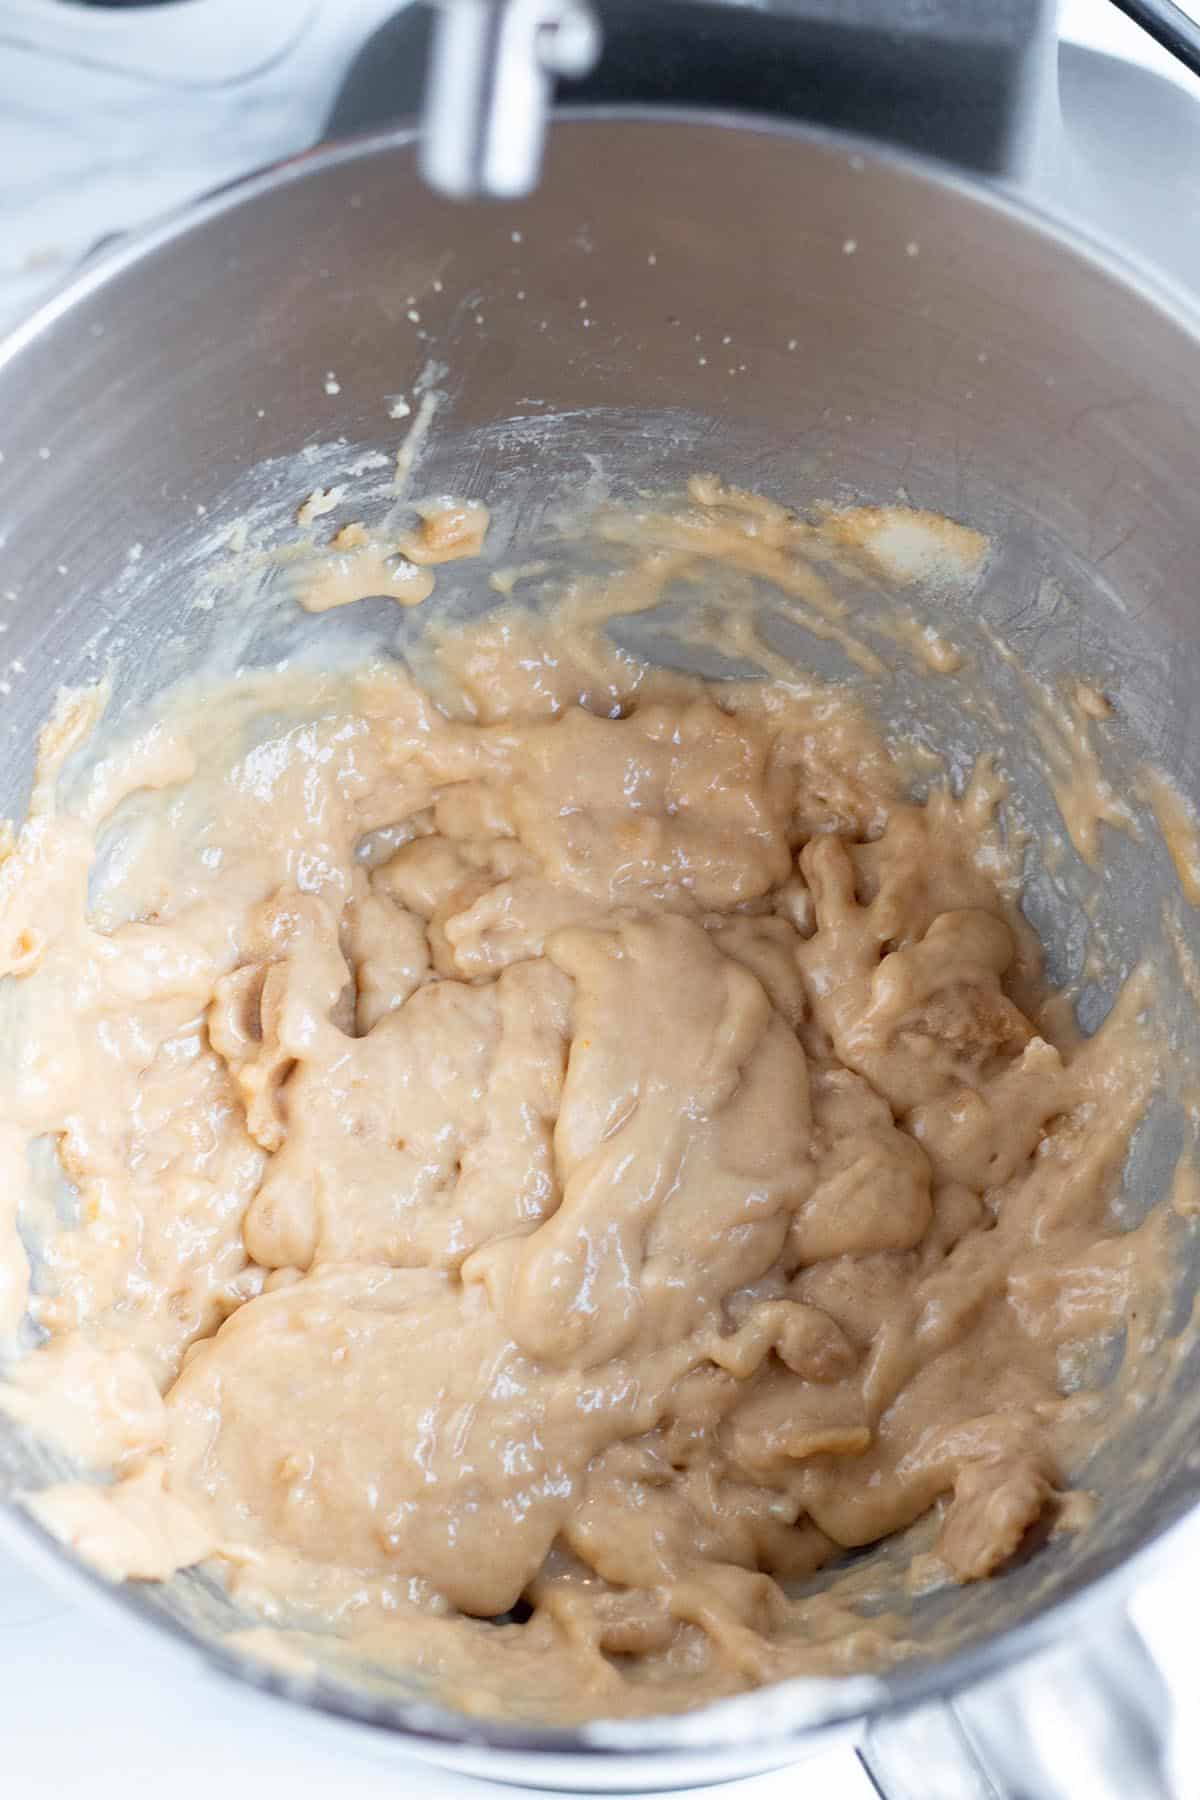 A stand mixer with eggs and Valhalla extra  mixed in the cookie dough.